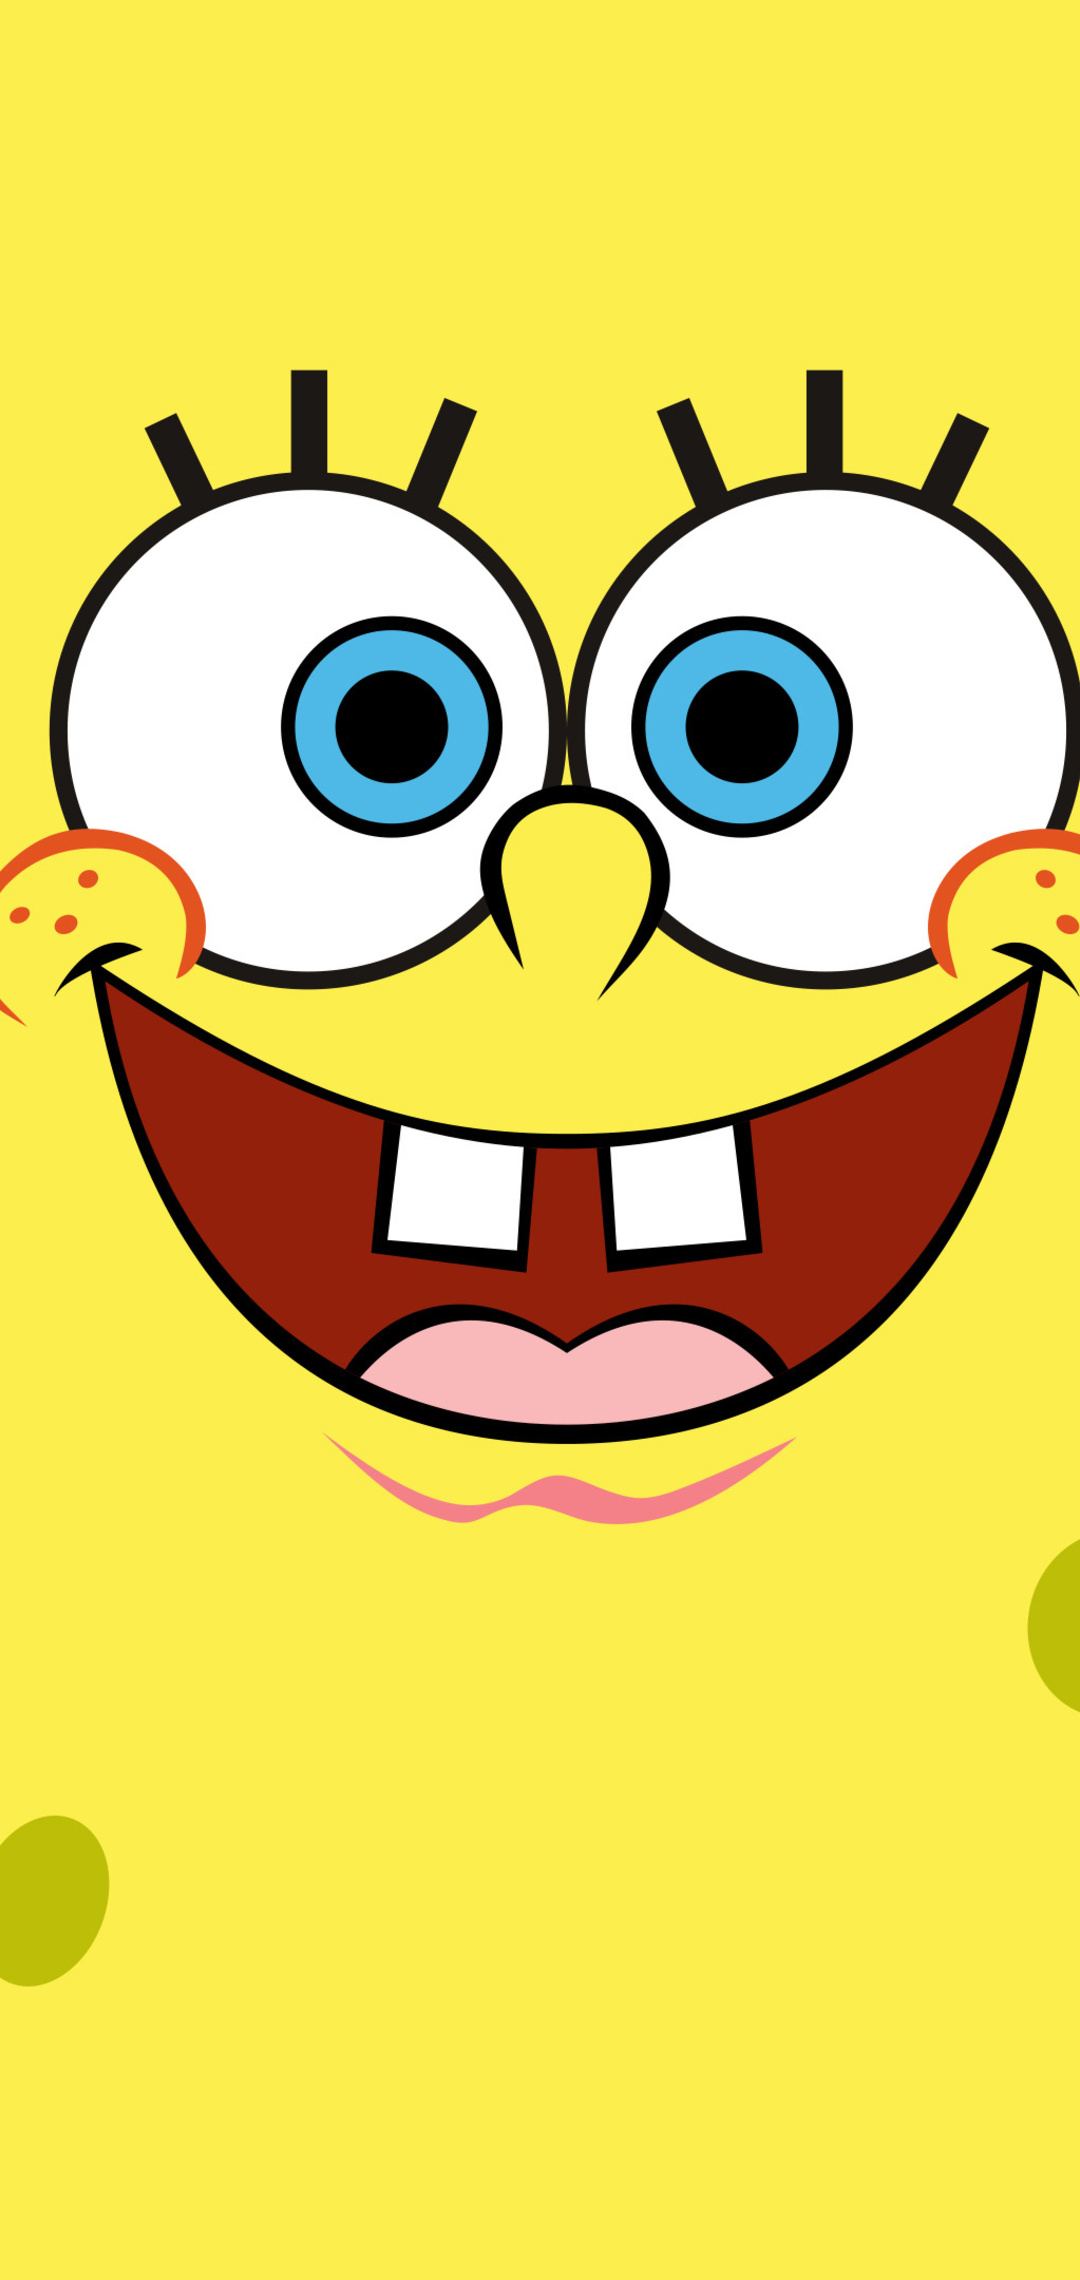 1080x2280 Spongebob Squarepants Minimalist 4k One Plus 6,Huawei p20,Honor view 10,Vivo y85,Oppo f7,Xiaomi Mi A2 HD 4k Wallpapers, Images, Backgrounds, Photos and Pictures